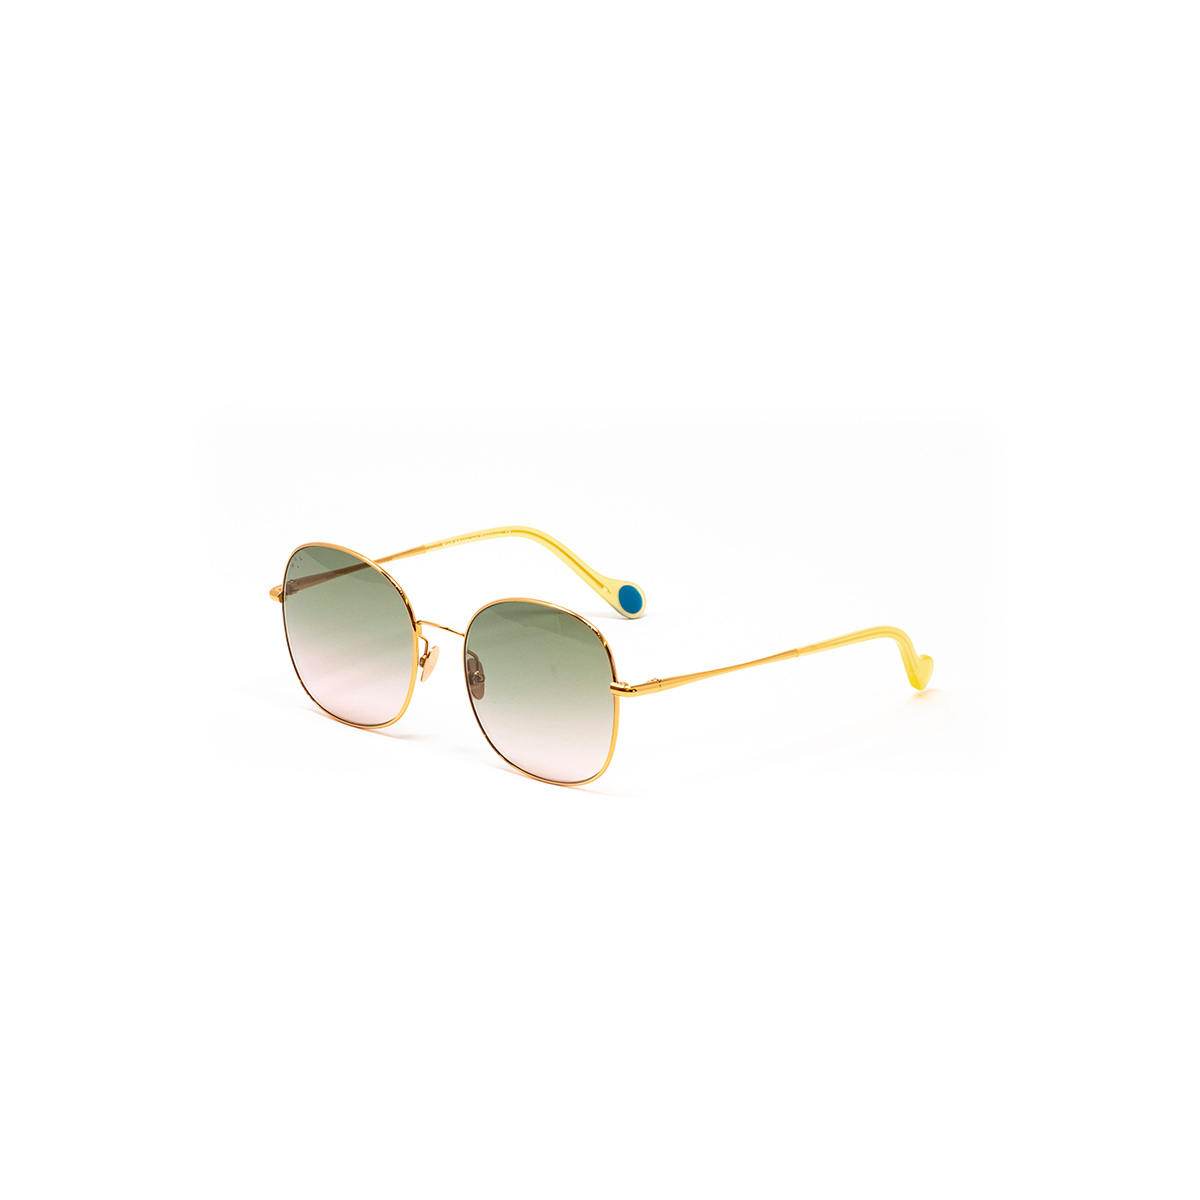 Sunglasses Diana, Green / Pink - Size 53-20 - Steel - image 2